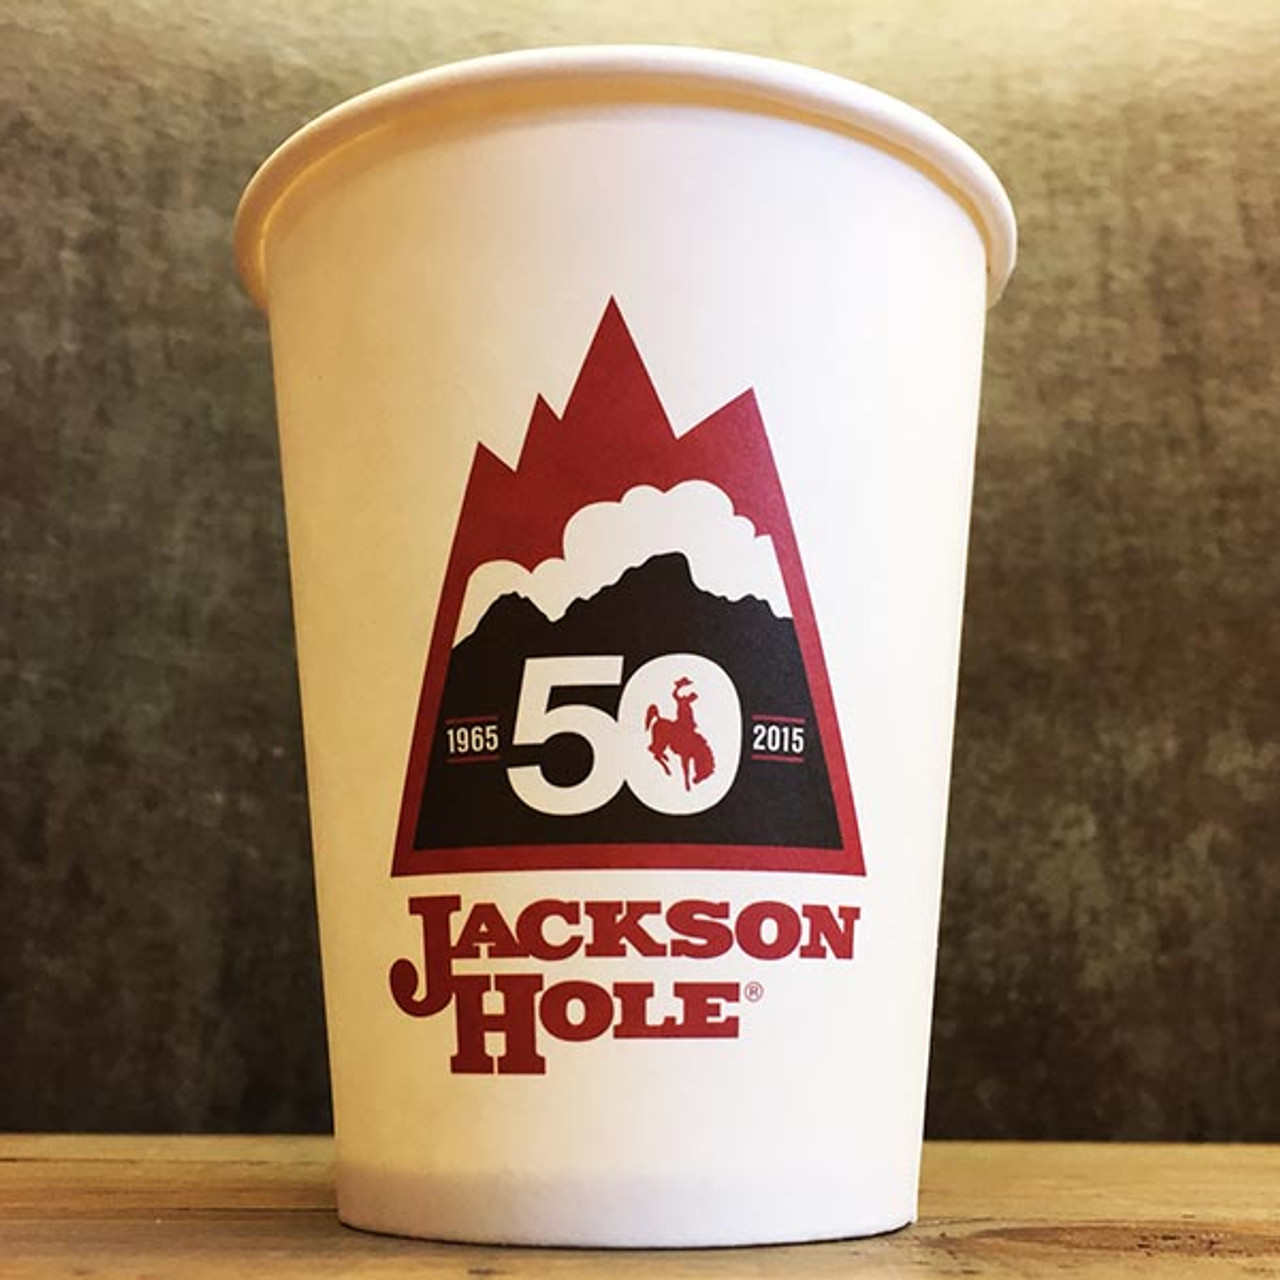 Custom Printed White Compostable Hot Cup